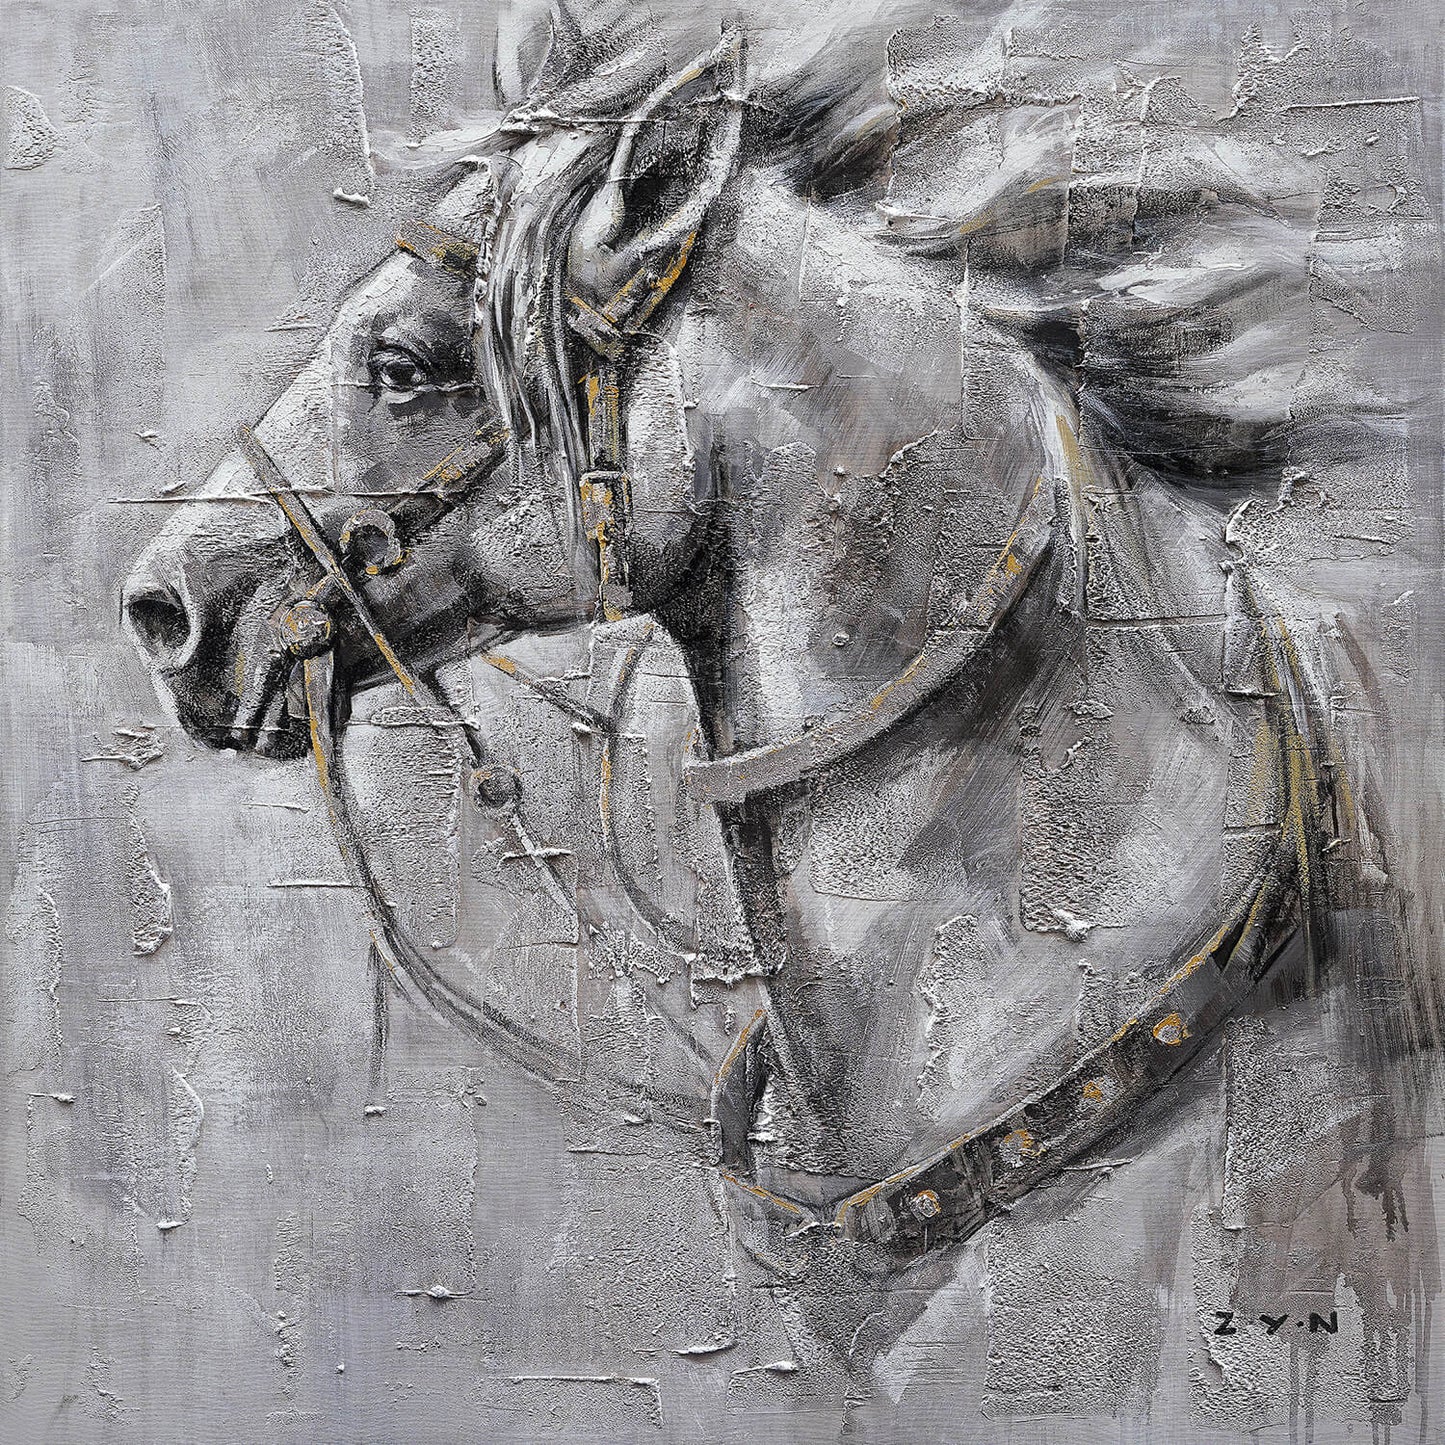 Hand-painted art "An Iron Horse" Oil Painting on Wrapped Canvas